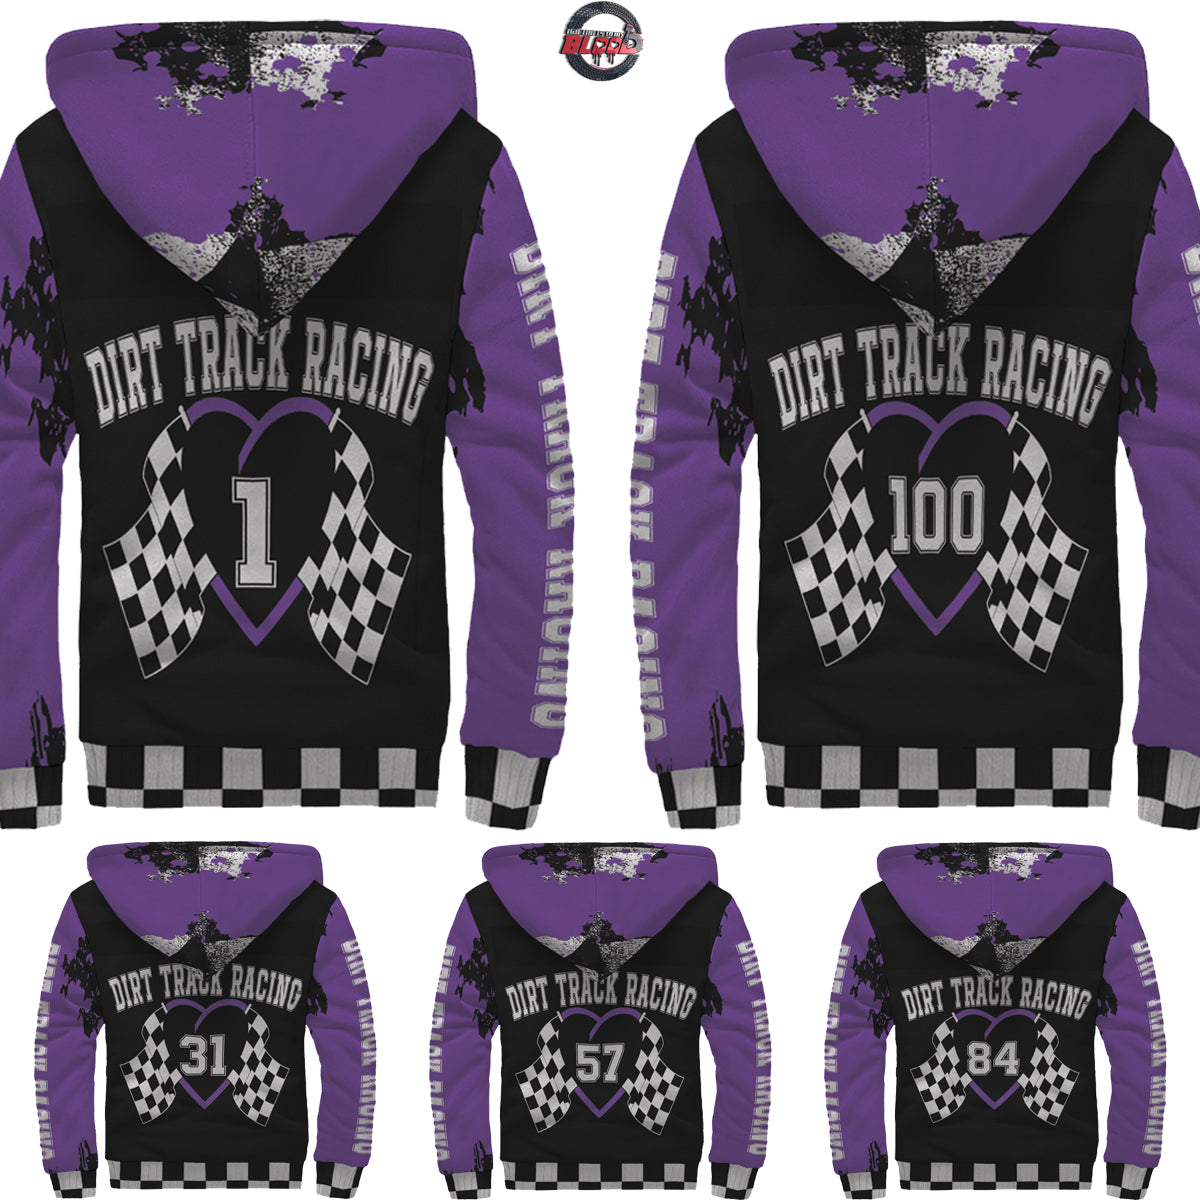 Dirt Track Racing Sherpa Jackets With Numbers From 1 to 100.